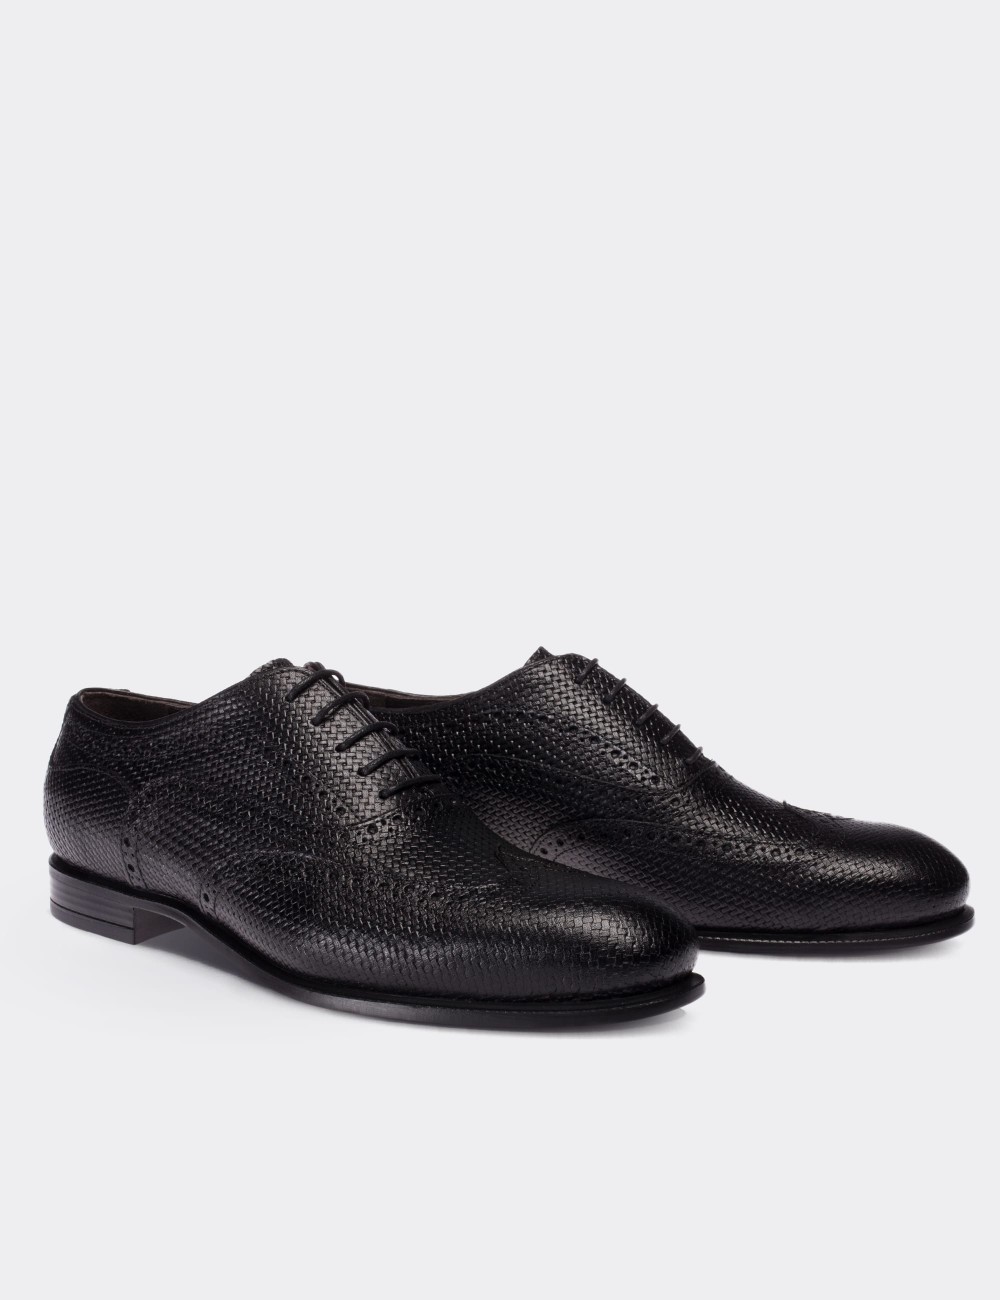 Black  Leather Classic Shoes - 01511MSYHC01